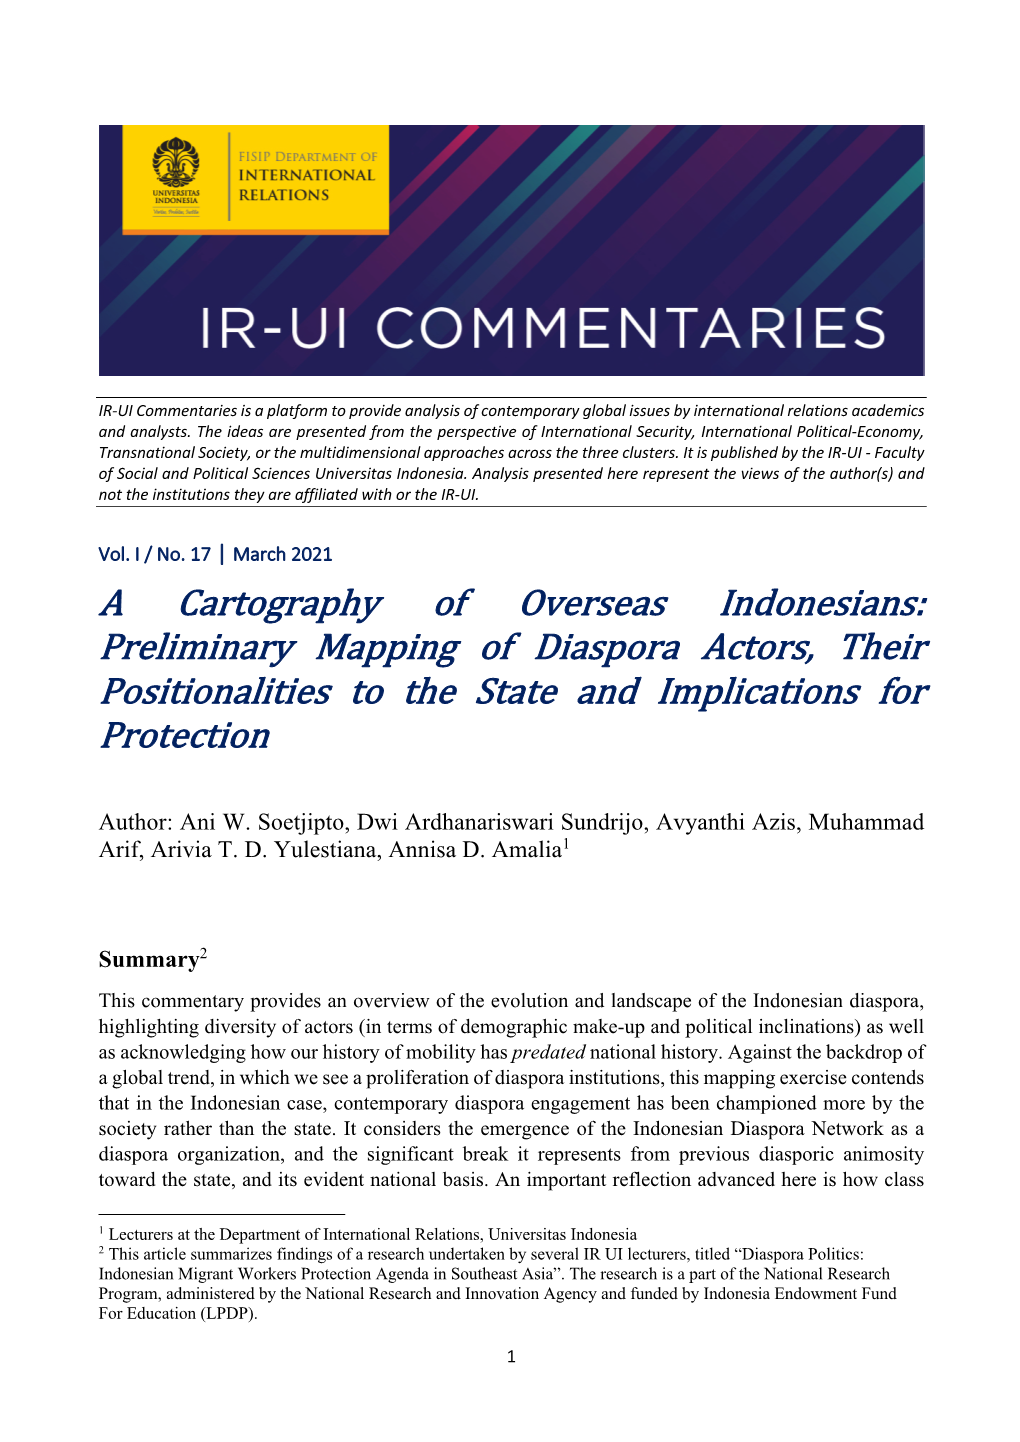 A Cartography of Overseas Indonesians: Preliminary Mapping of Diaspora Actors, Their Positionalities to the State and Implications for Protection